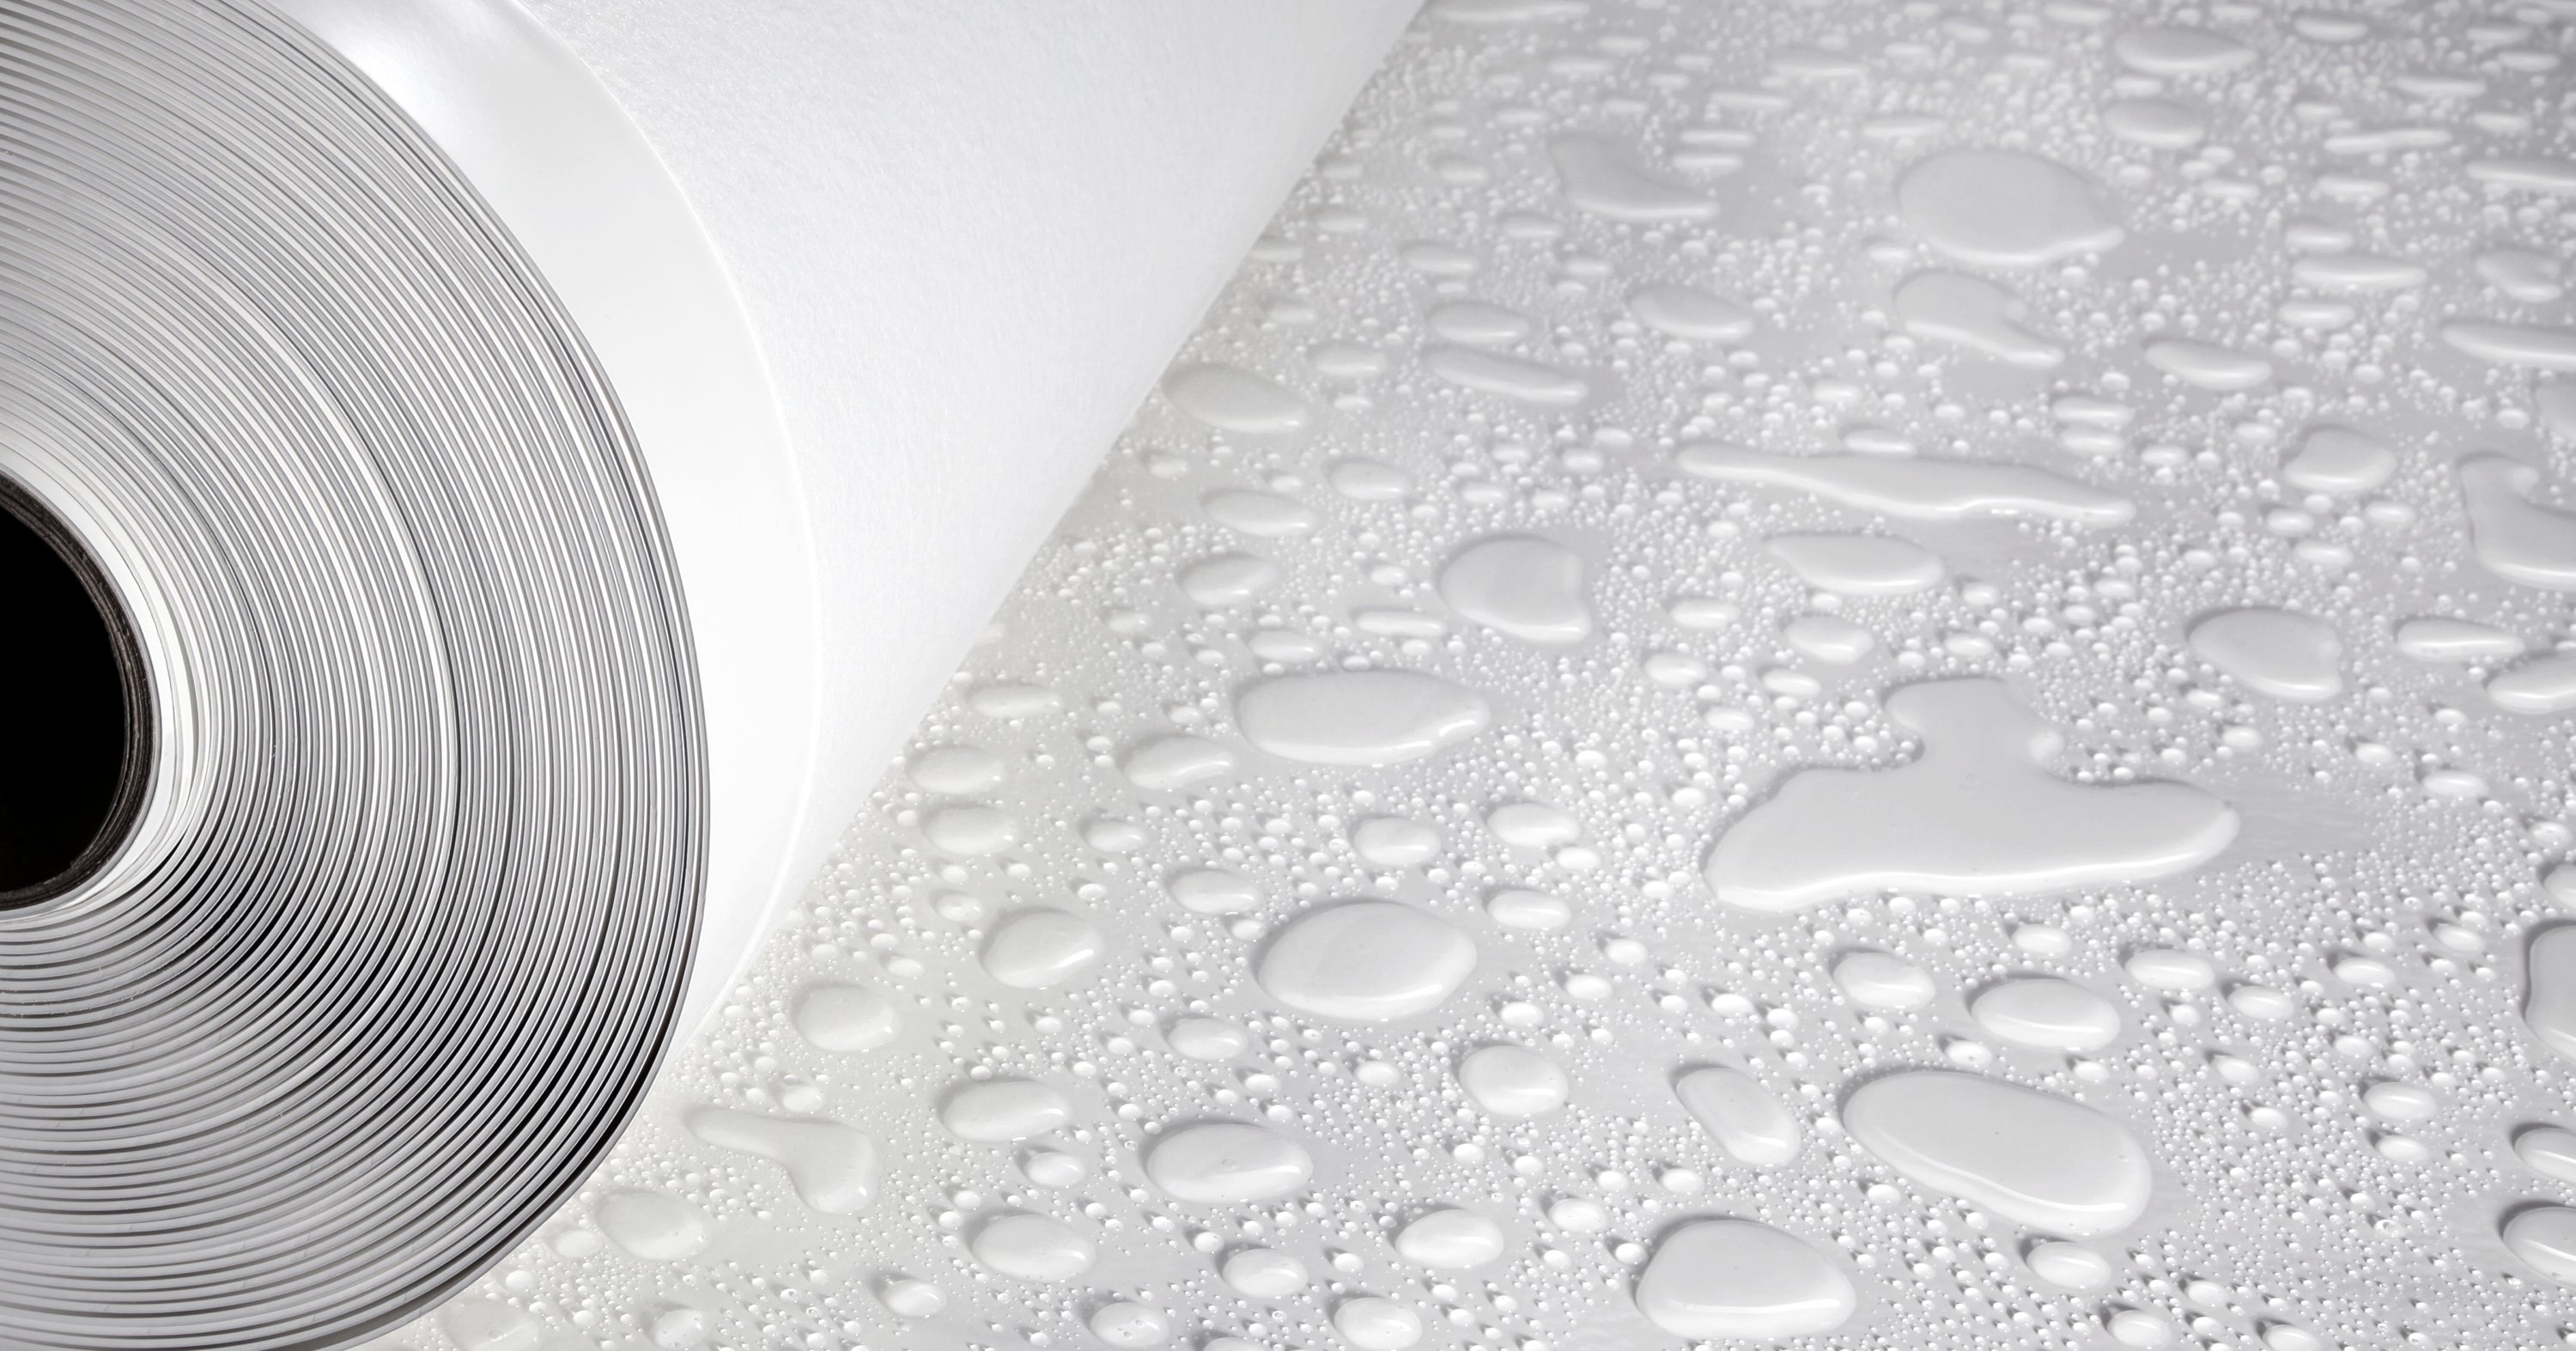 EVALON® waterproofing membrane with drops